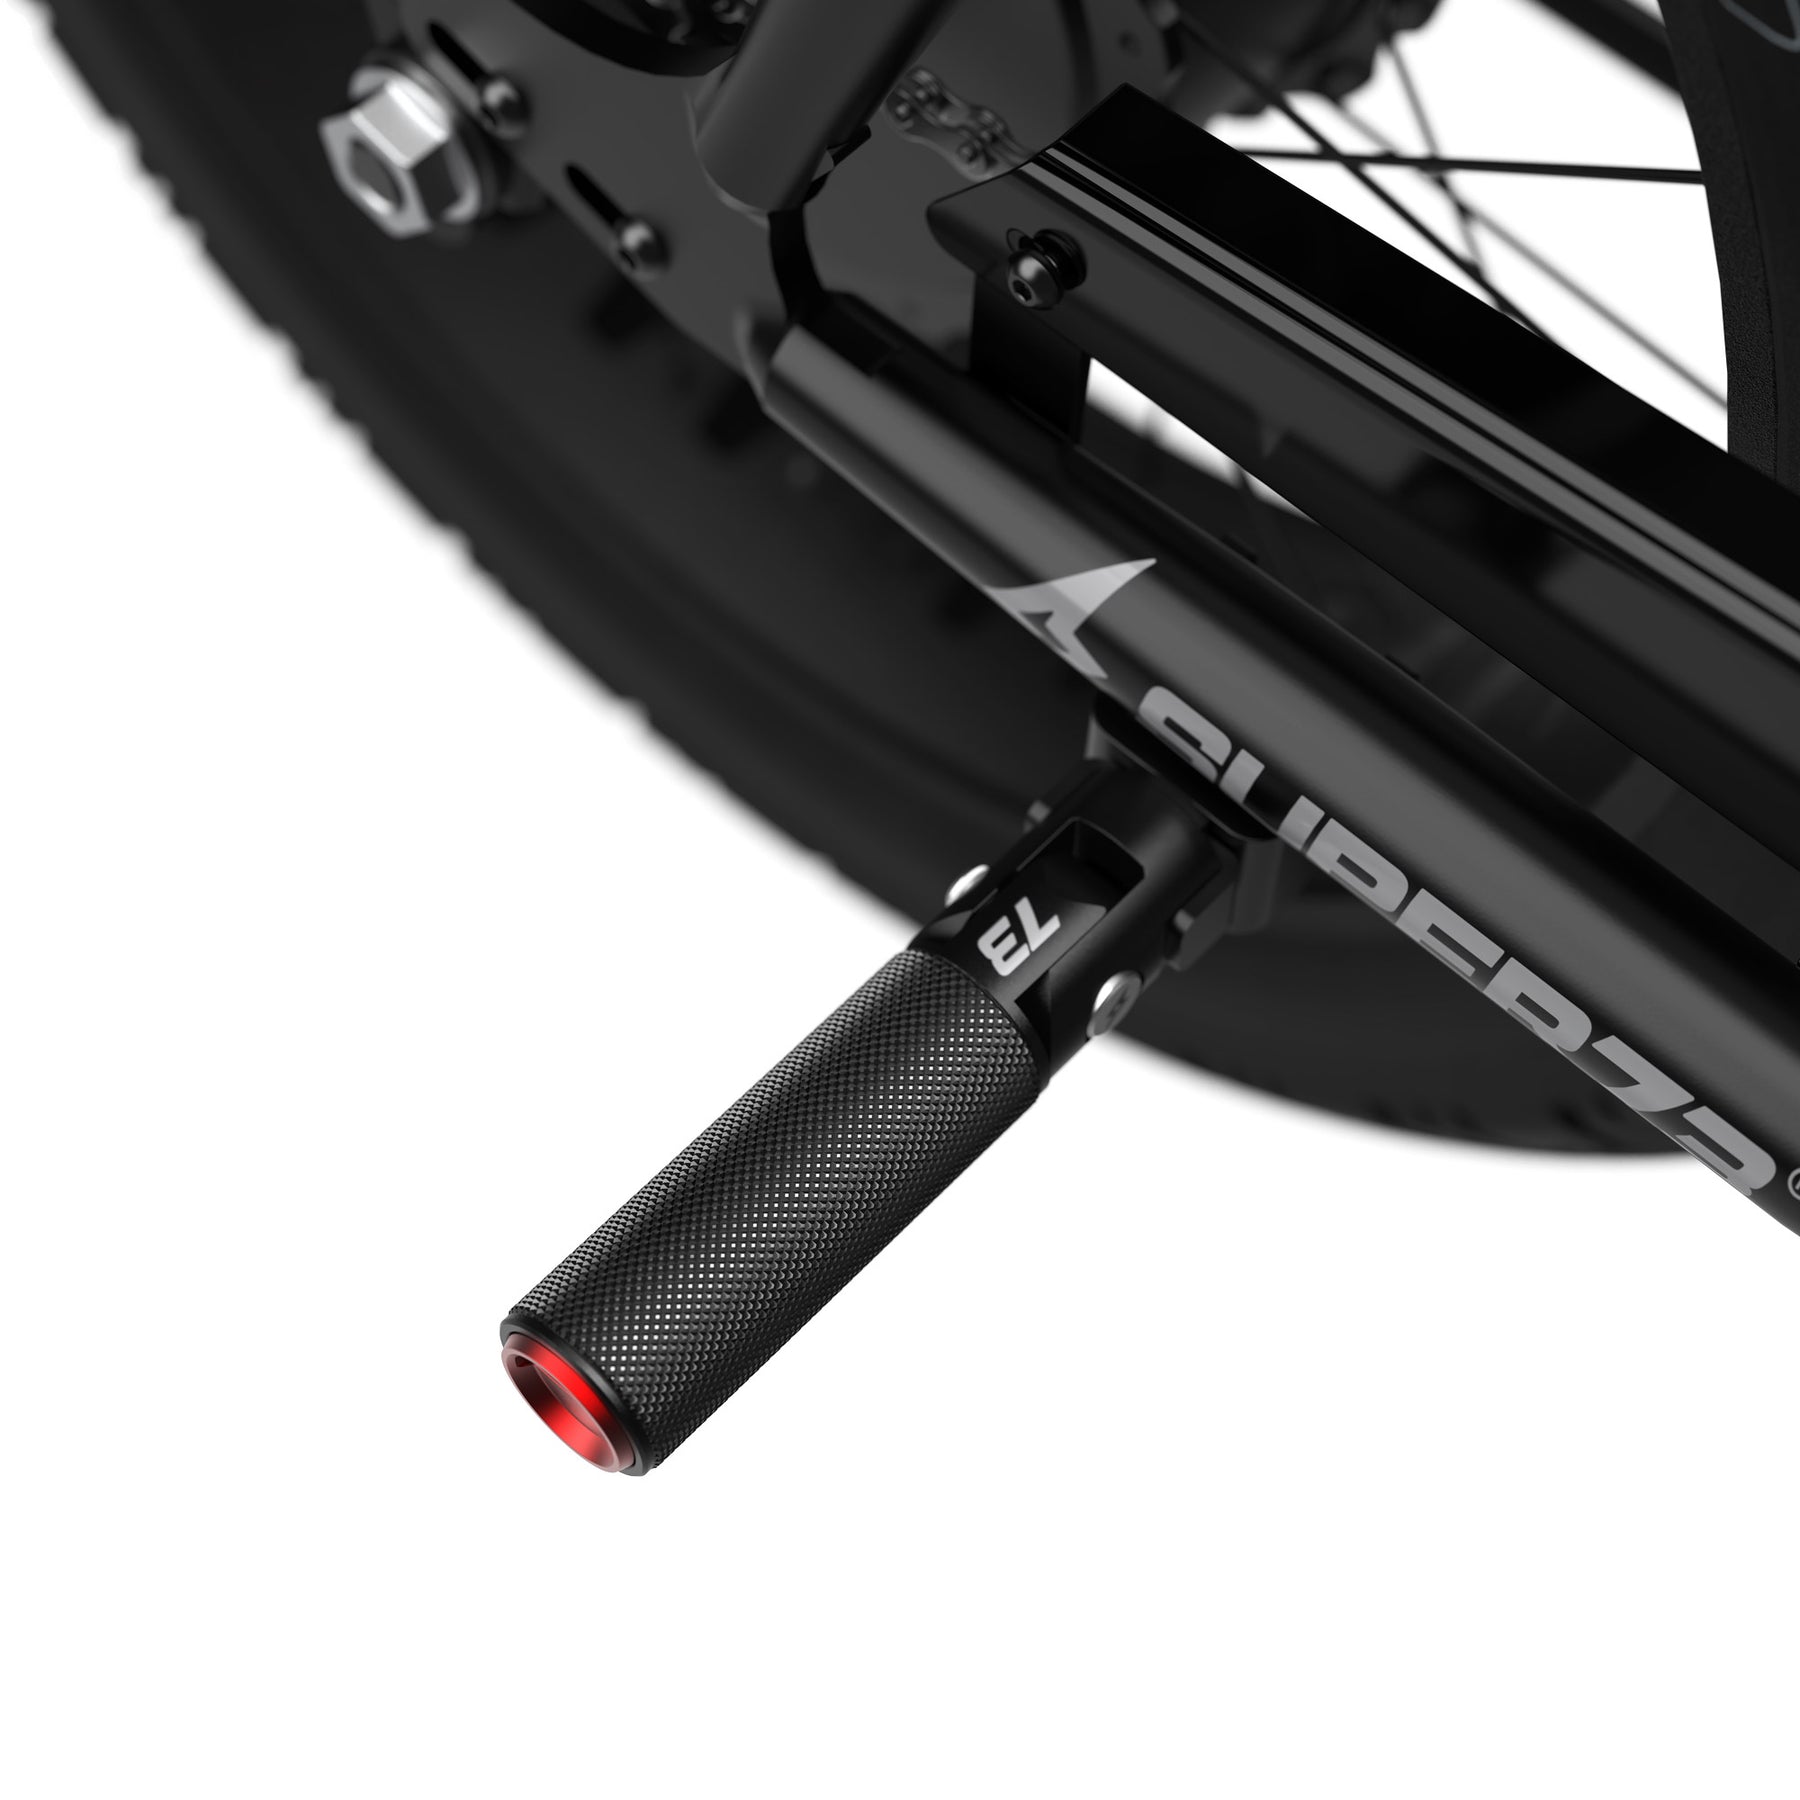 alternative view of Folding peg with red cap on bike